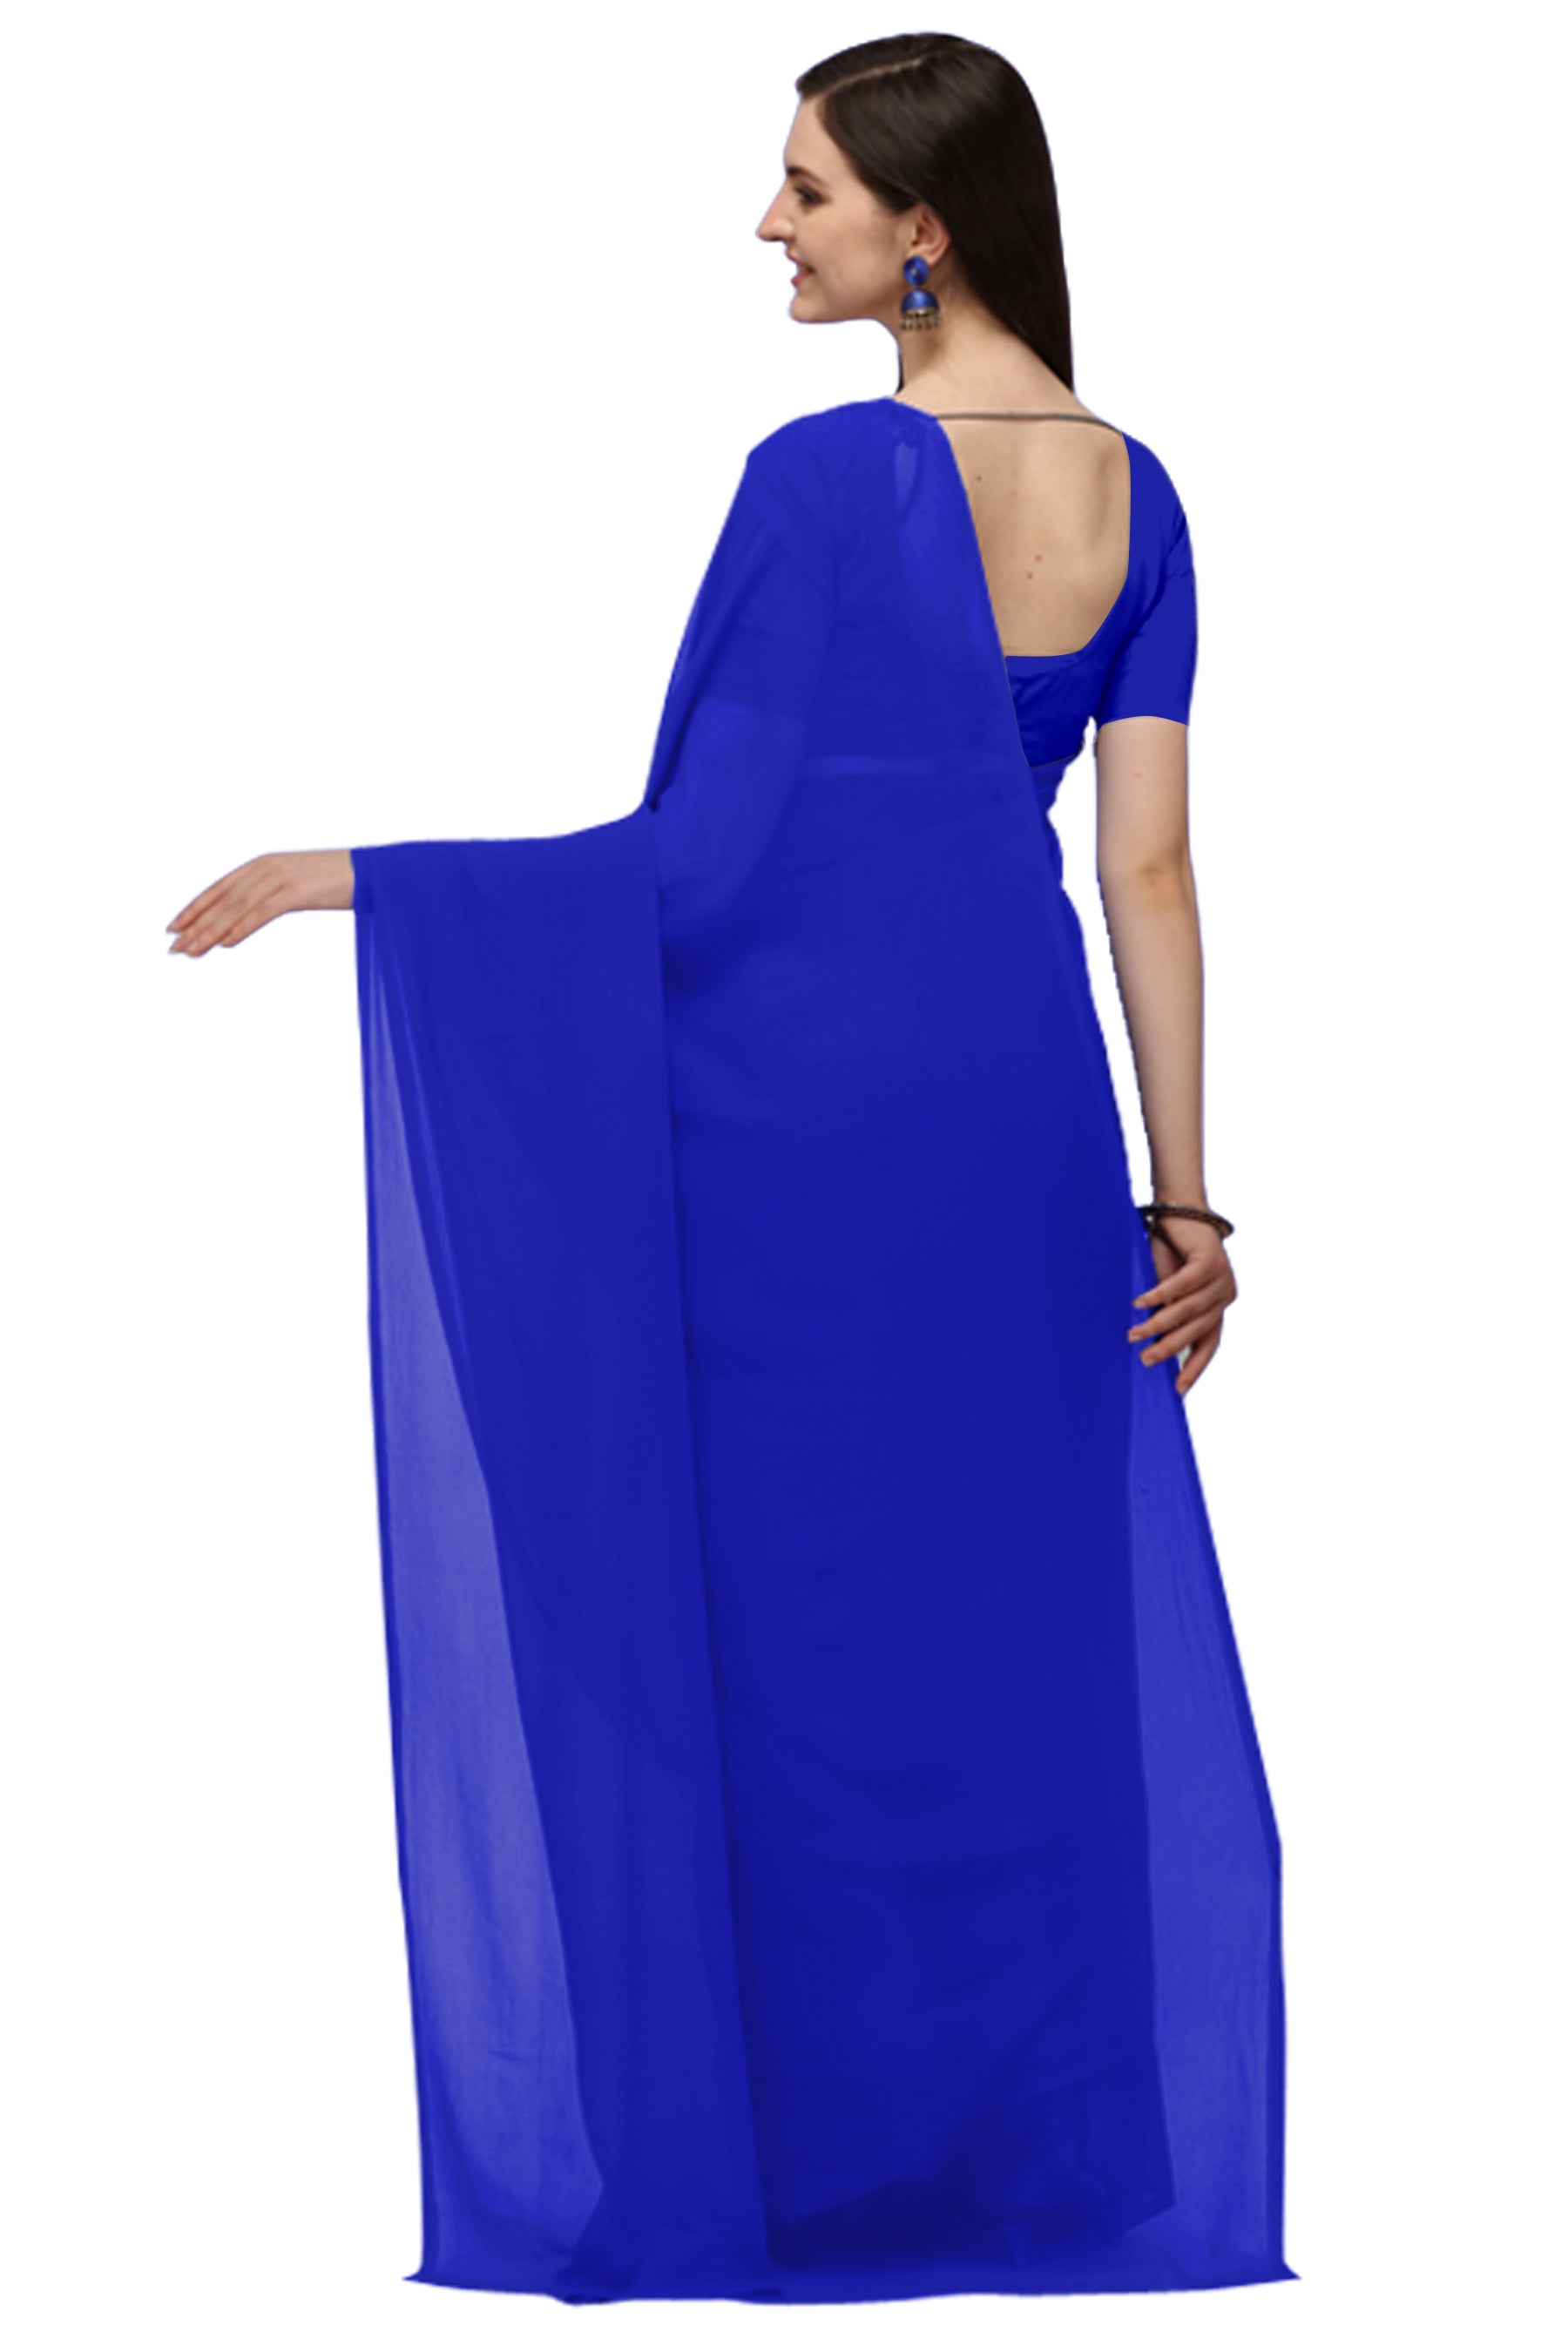 Women's Plain Woven Daily Wear  Formal Georgette Sari With Blouse Piece (Royal Blue) - NIMIDHYA